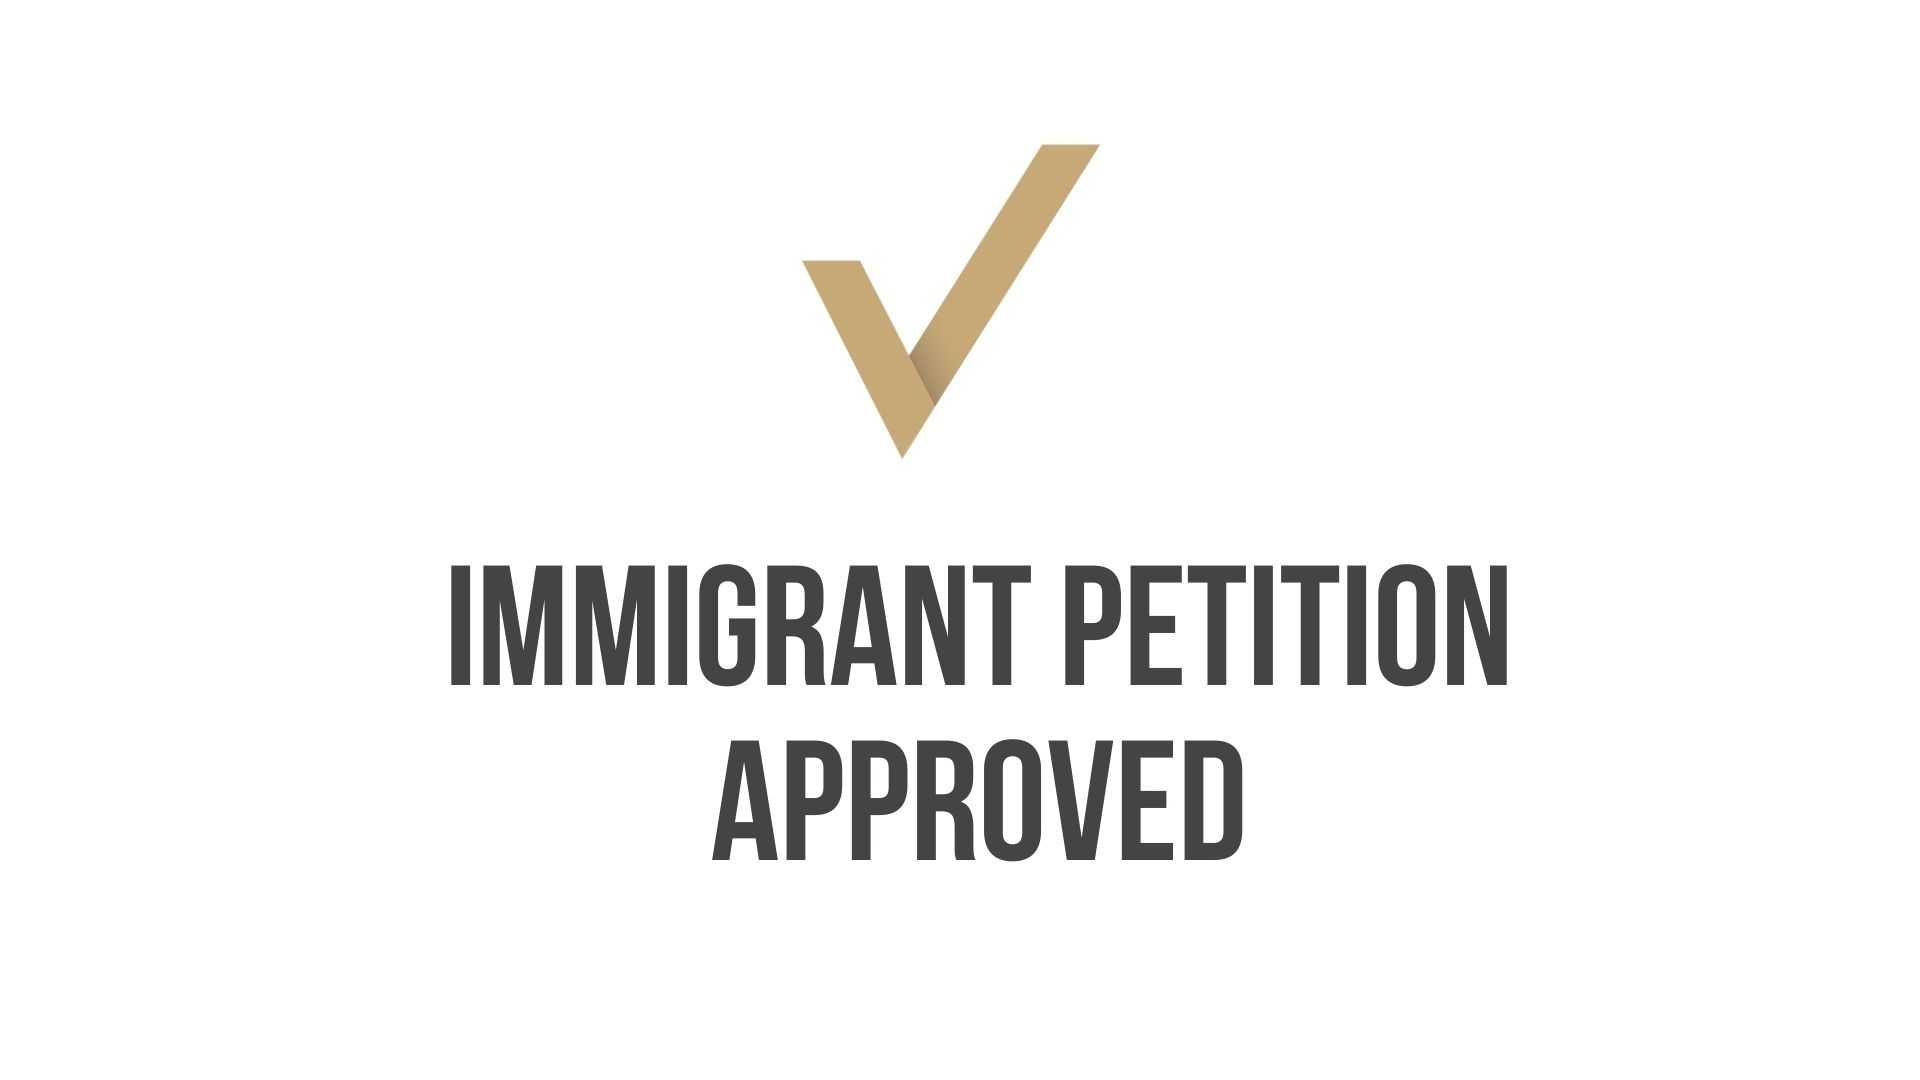 Immigrant Petition Approved